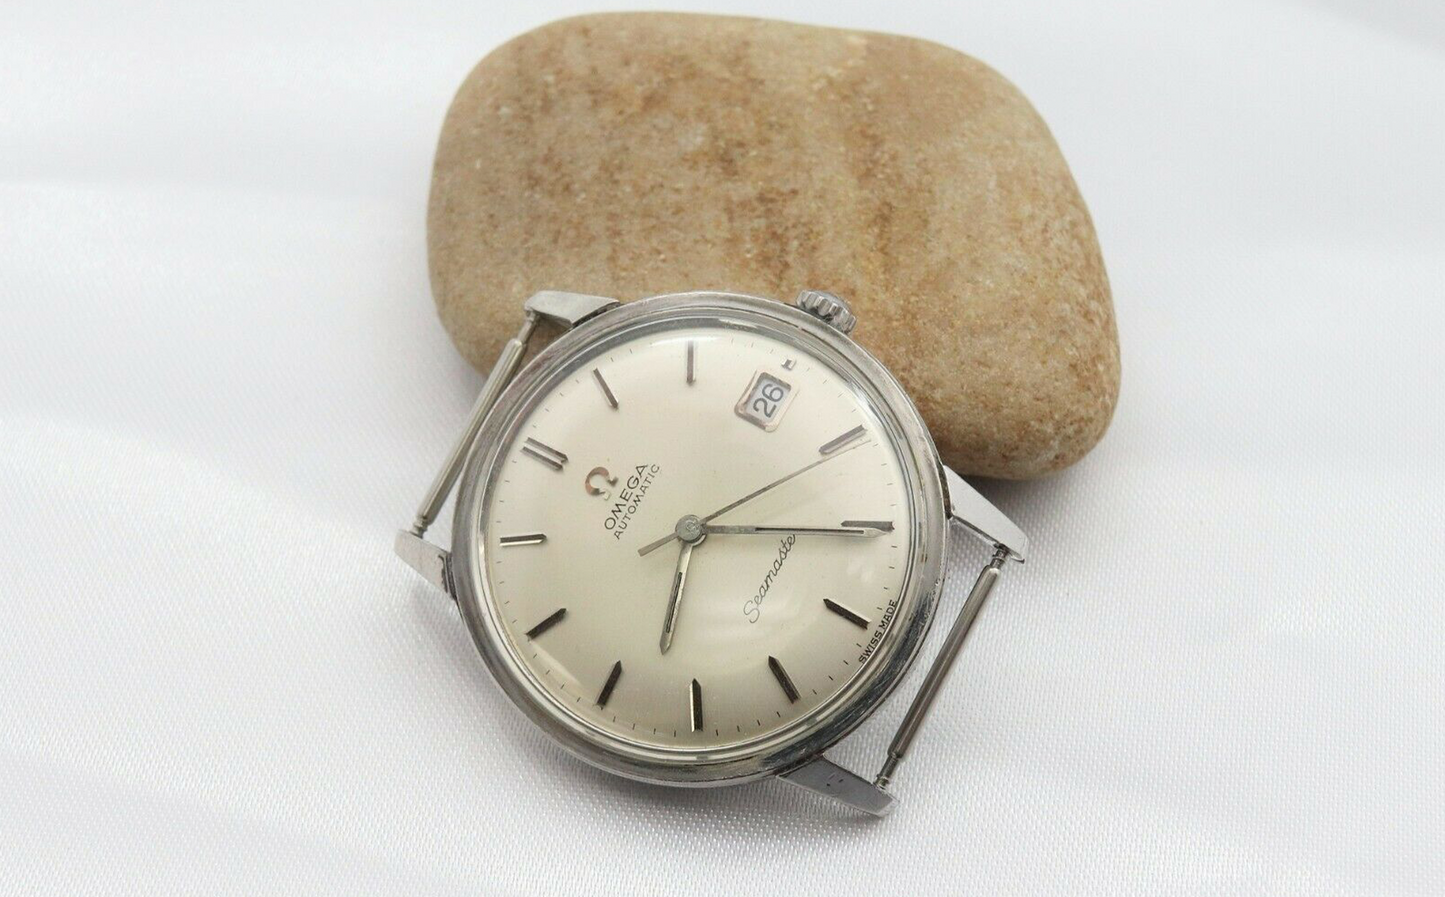 Vintage Omega Seamaster 34mm Watch Circa 1960s with 562 Movement, Automatic, Date